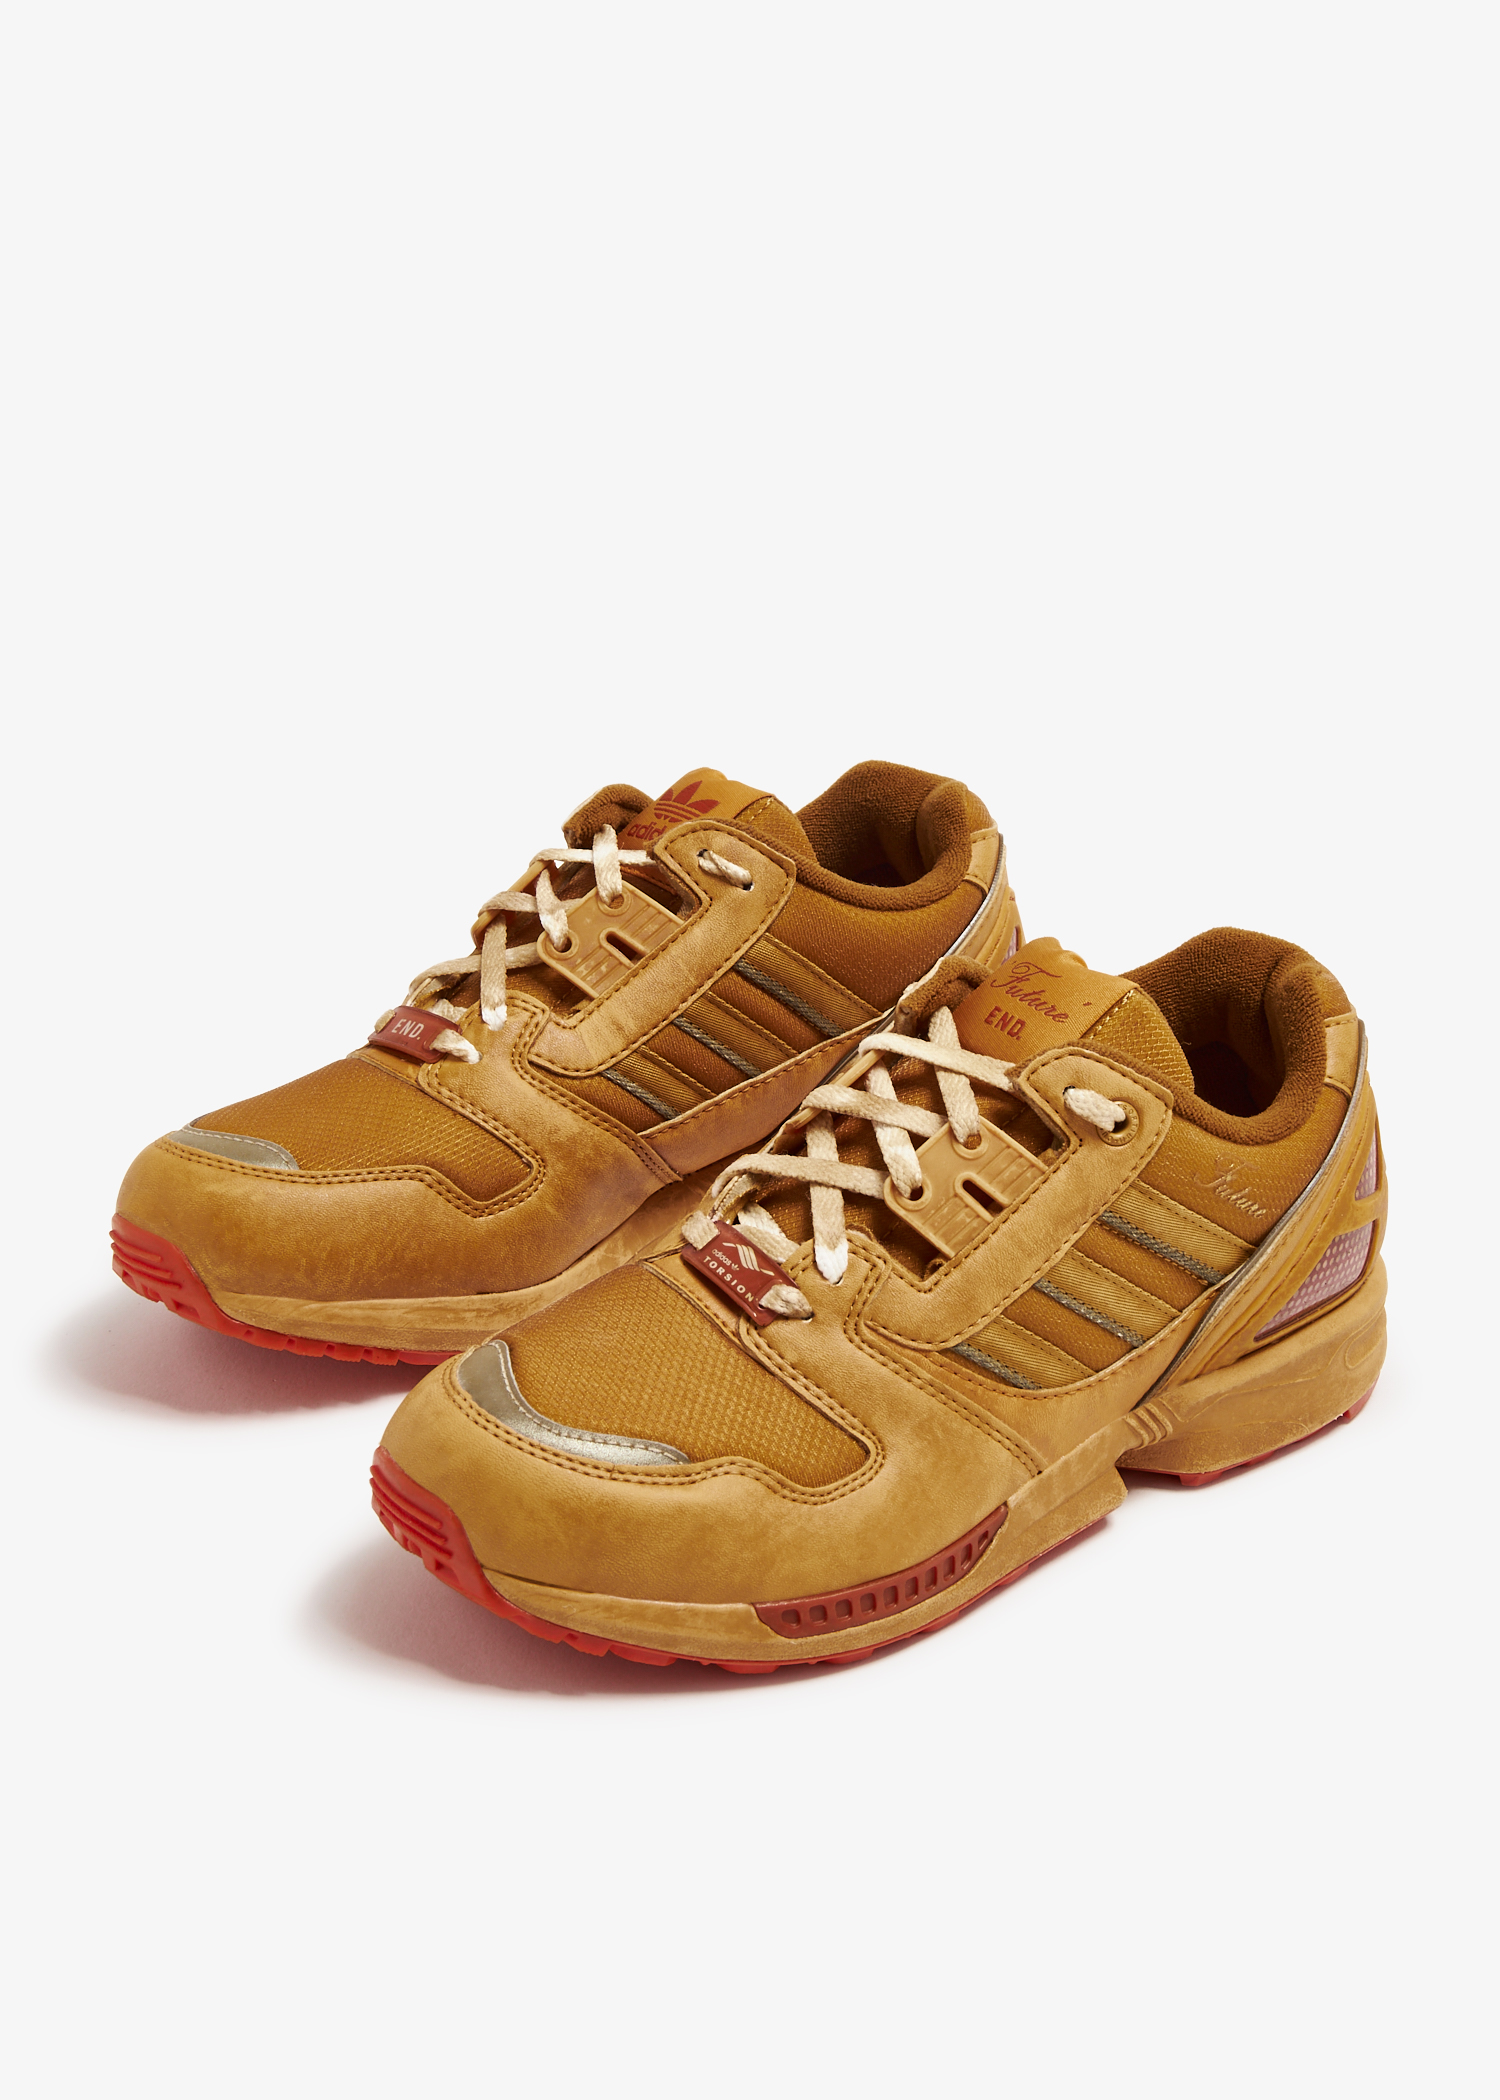 Adidas x END. ZX 8000 'Consortium Cup' sneakers for Women - Yellow 